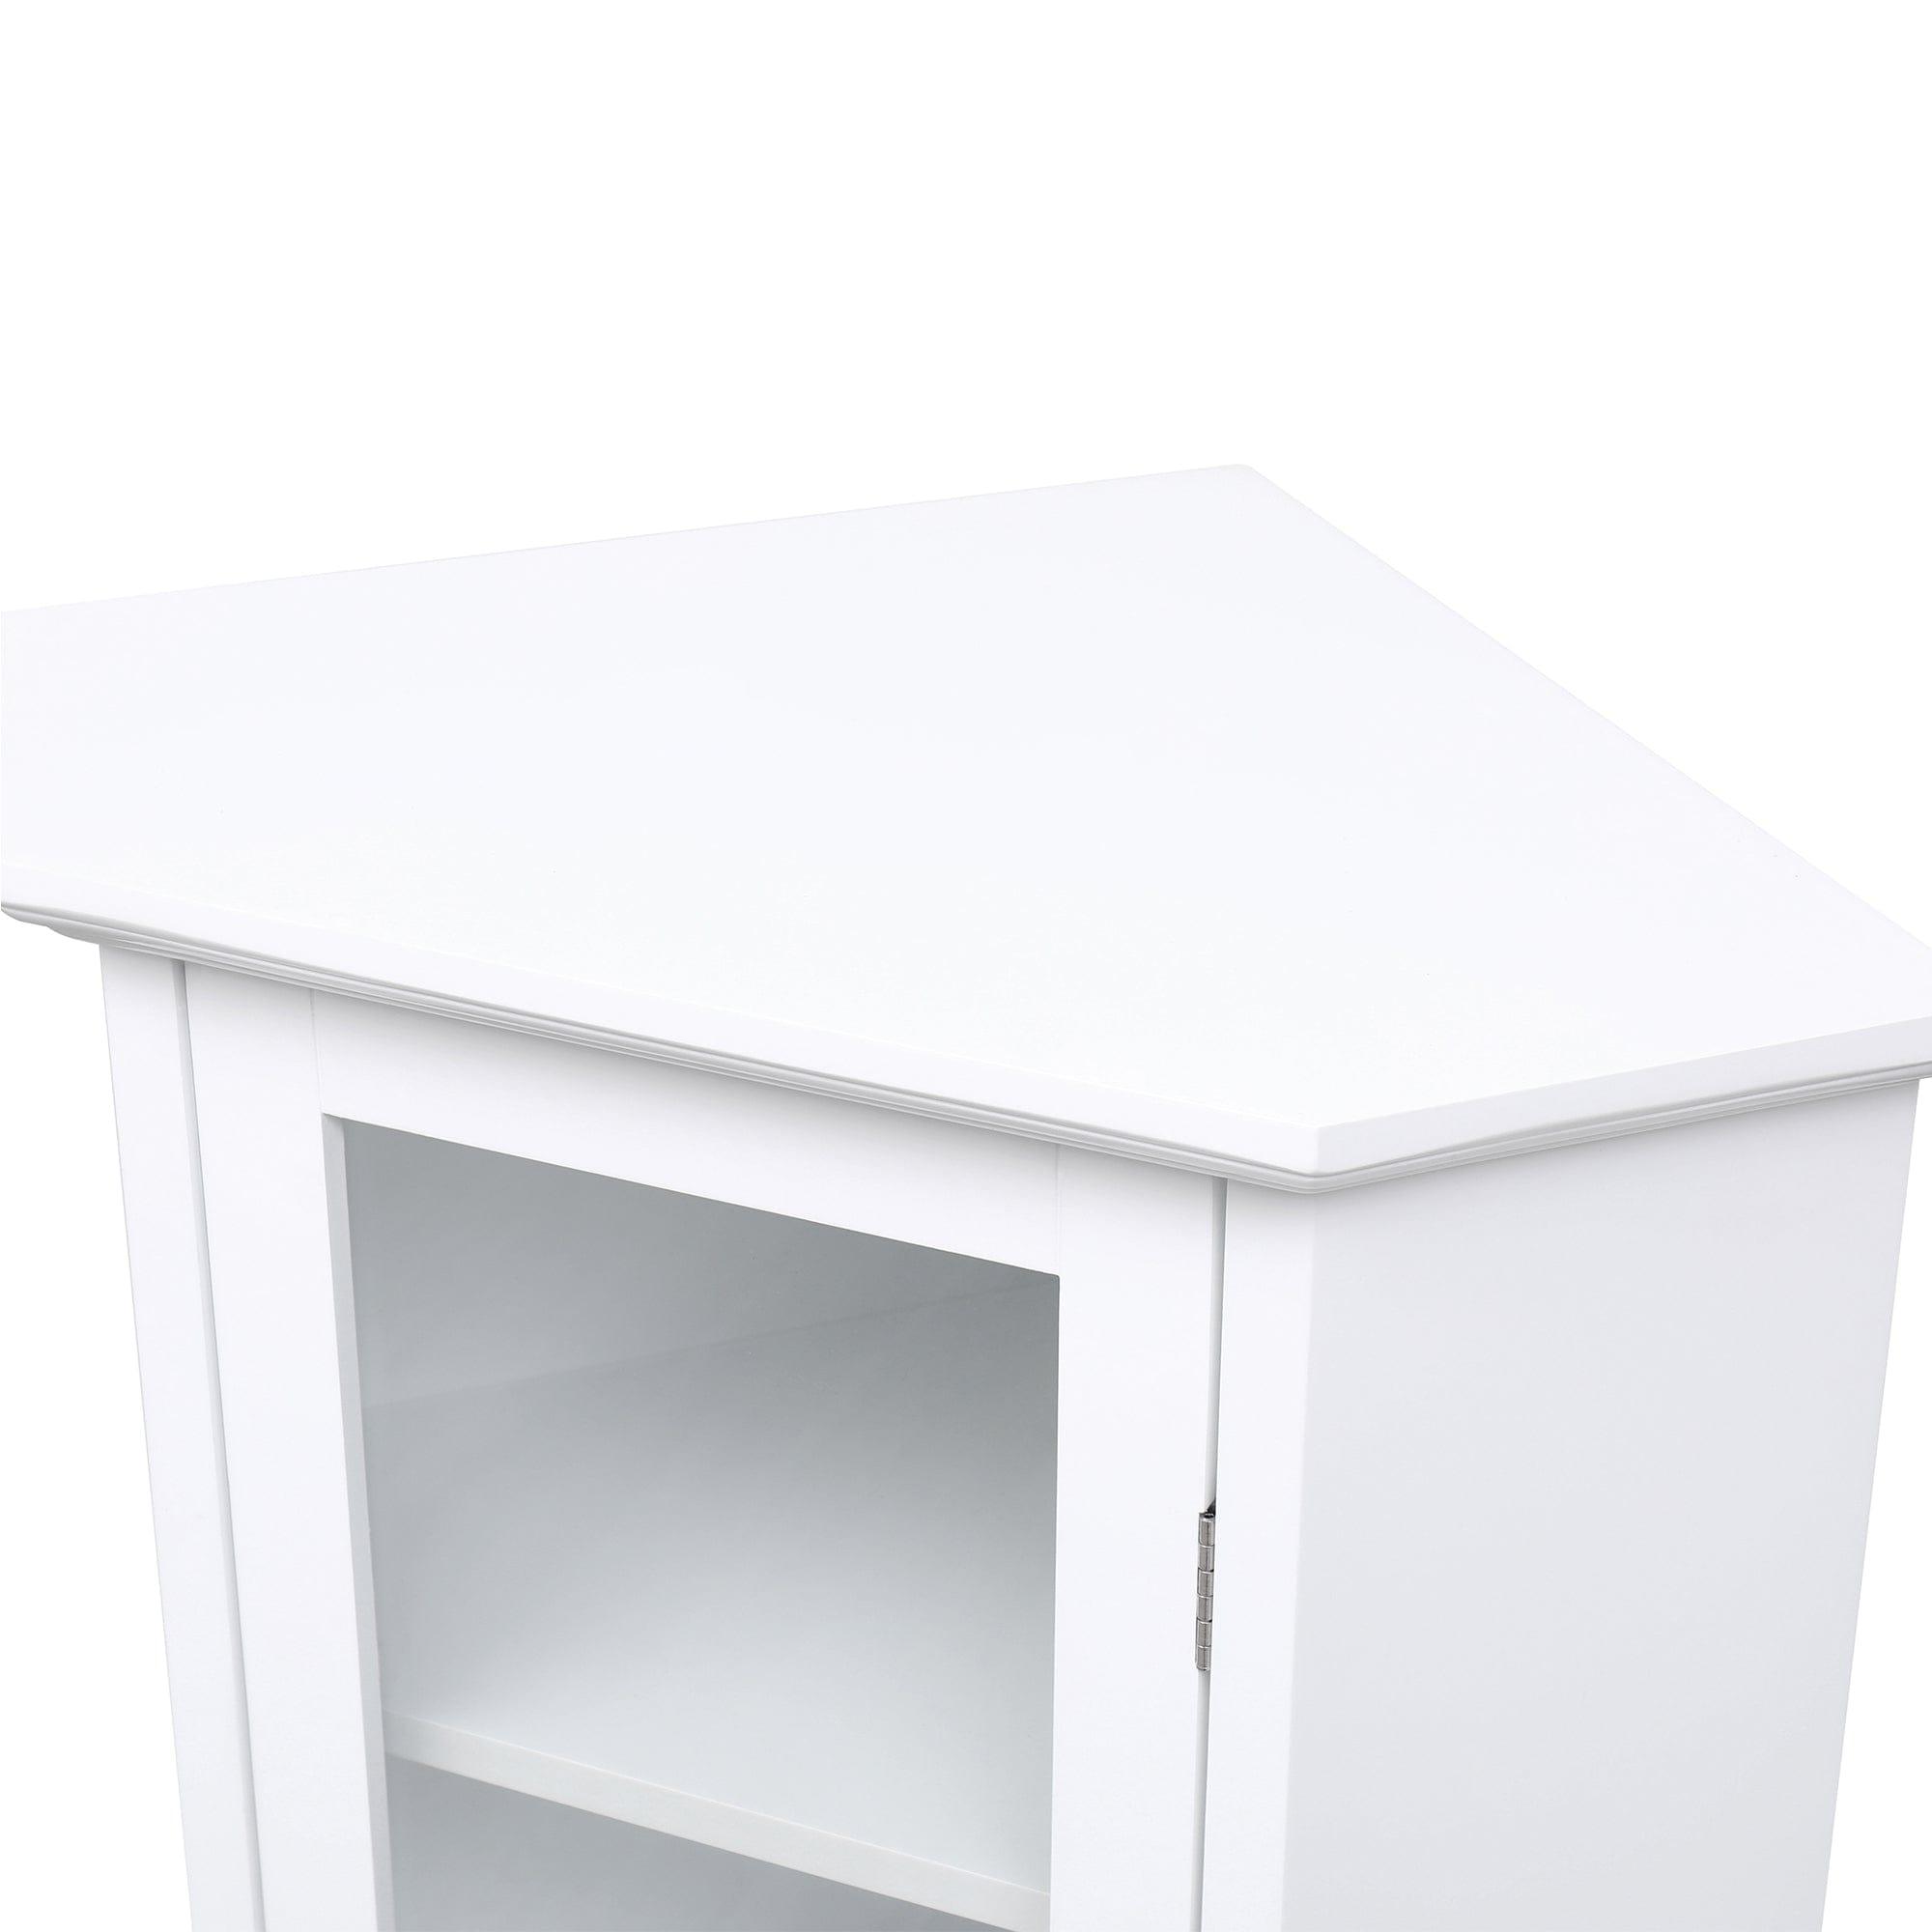 Shop Freestanding Bathroom Cabinet with Glass Door, Corner Storage Cabinet for Bathroom, Living Room and Kitchen, MDF Board with Painted Finish, White Mademoiselle Home Decor